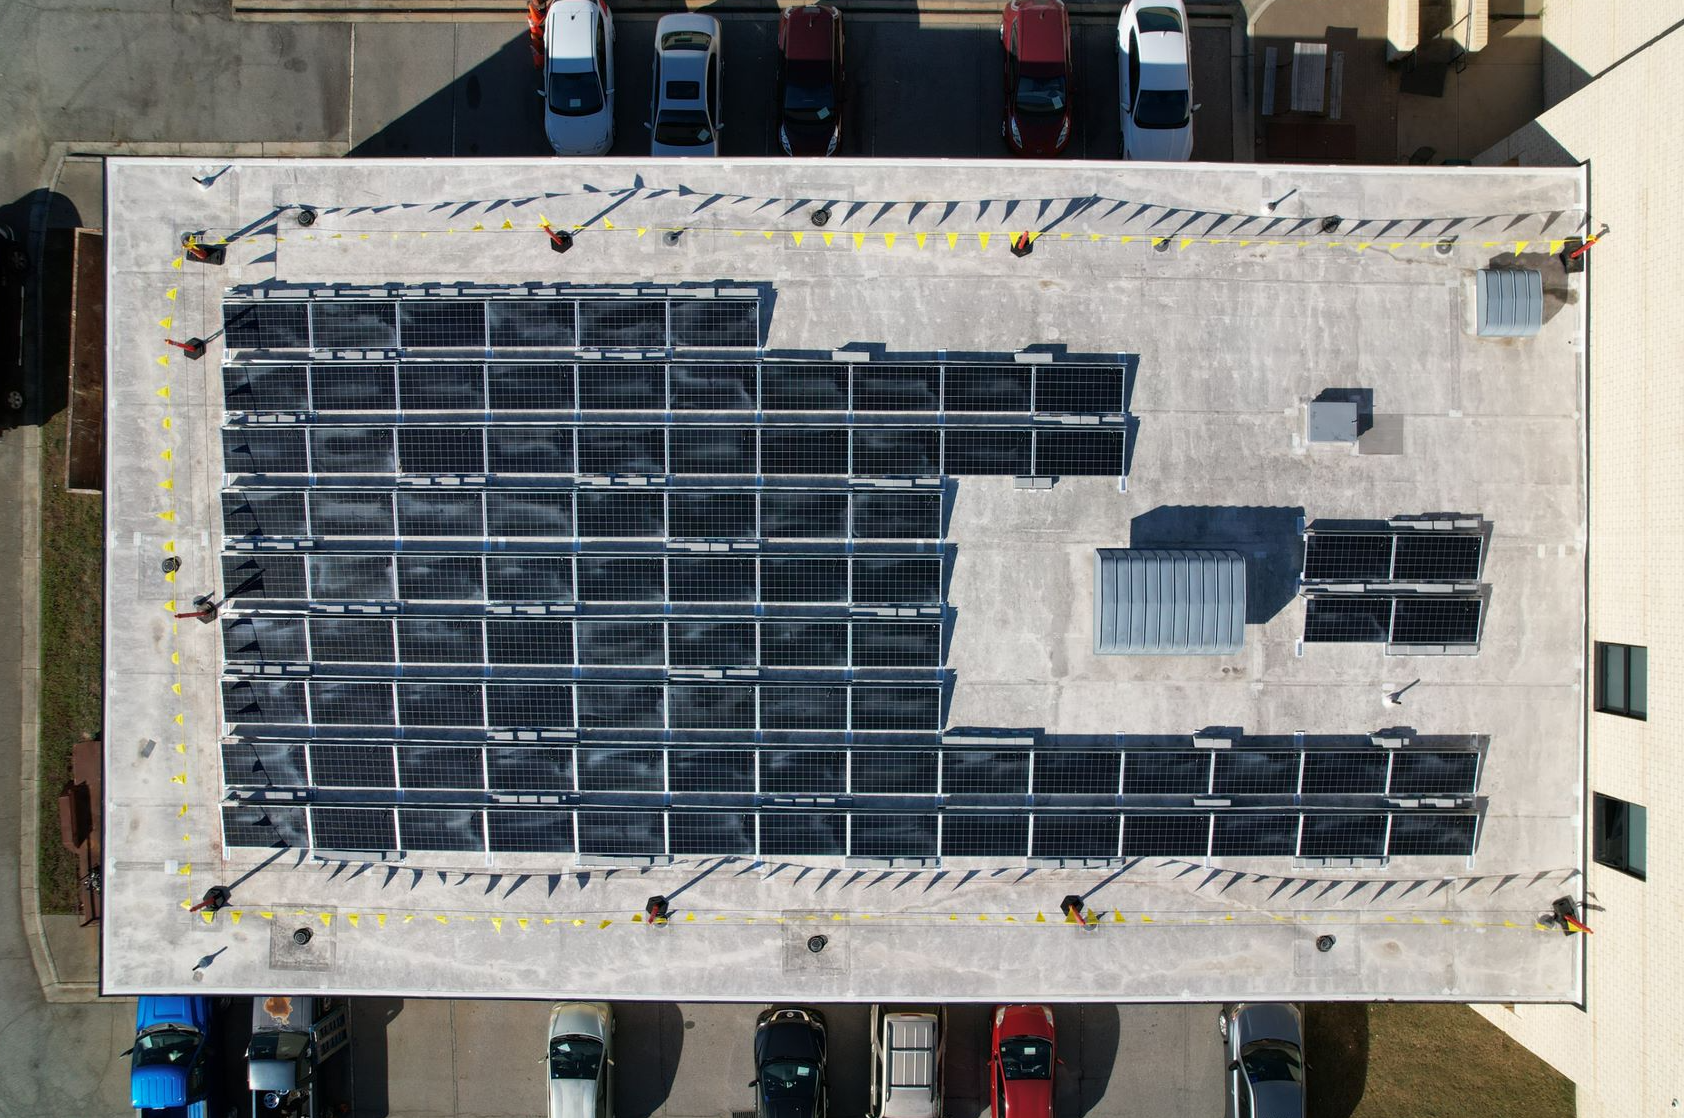 Overhead view of new solar panels